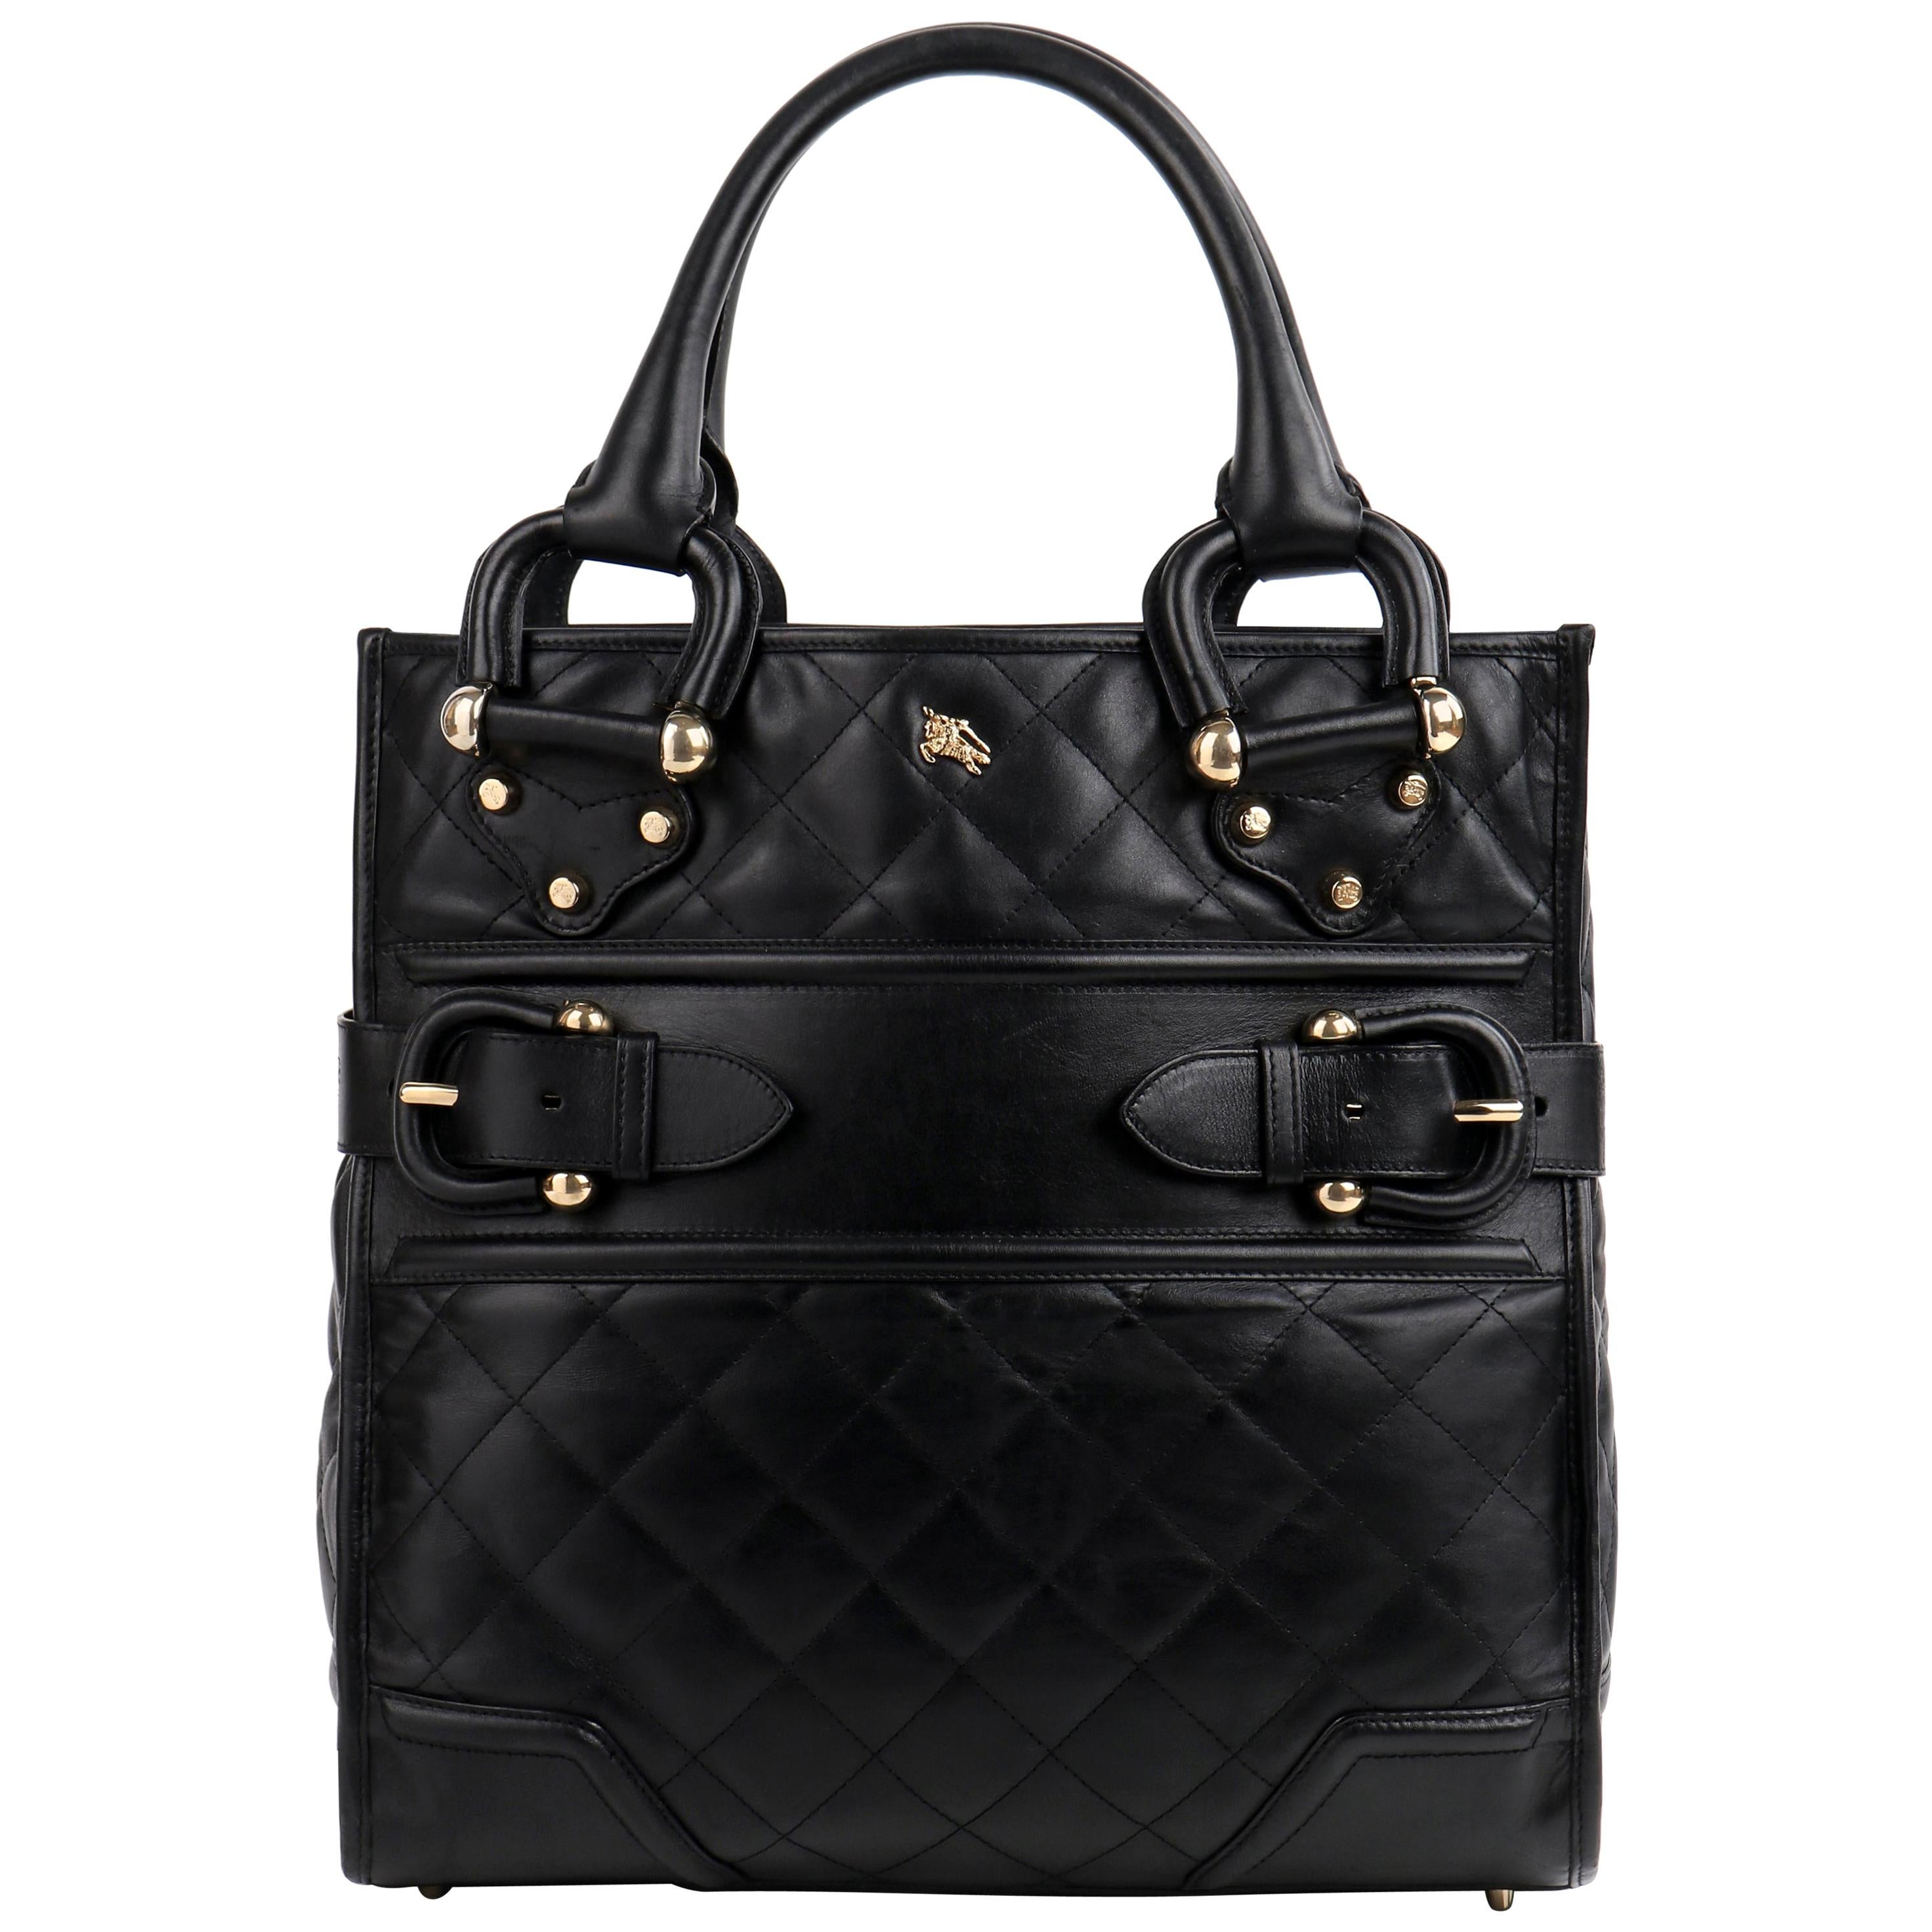 Prorsum Manor Style Quilted Top Handle Buckle Detail Handbag Purse at burberry manor bag, burberry prorsum burberry prorsum purse